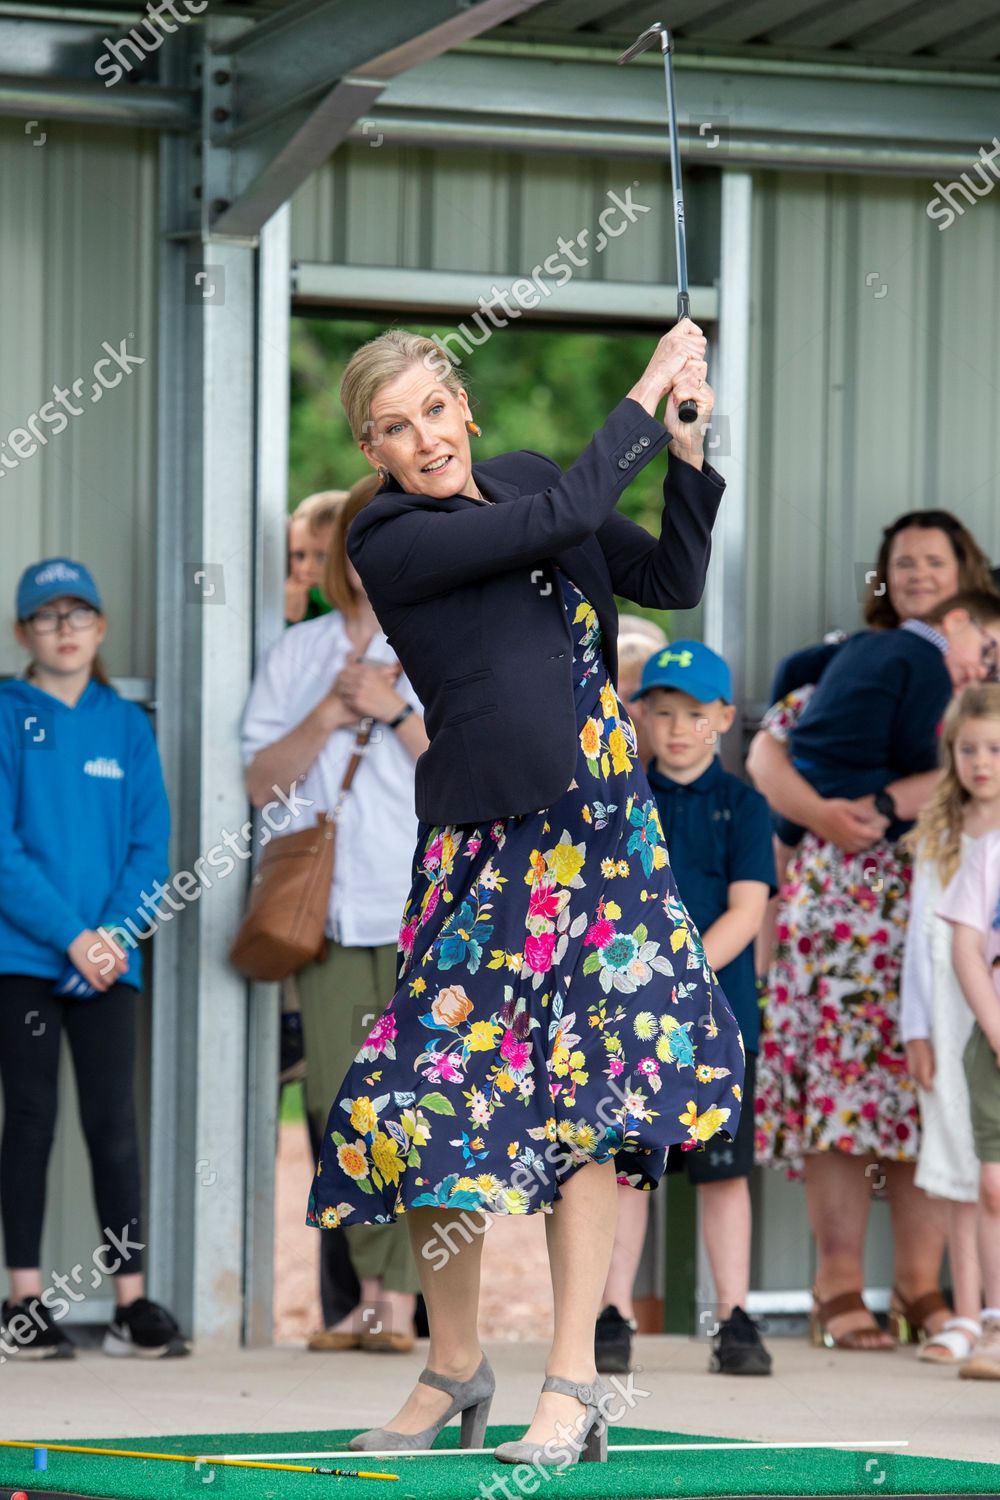 CASA REAL BRITÁNICA - Página 76 Prince-edward-and-sophie-countess-of-wessex-visit-to-forfar-golf-club-scotland-uk-shutterstock-editorial-12172307bi